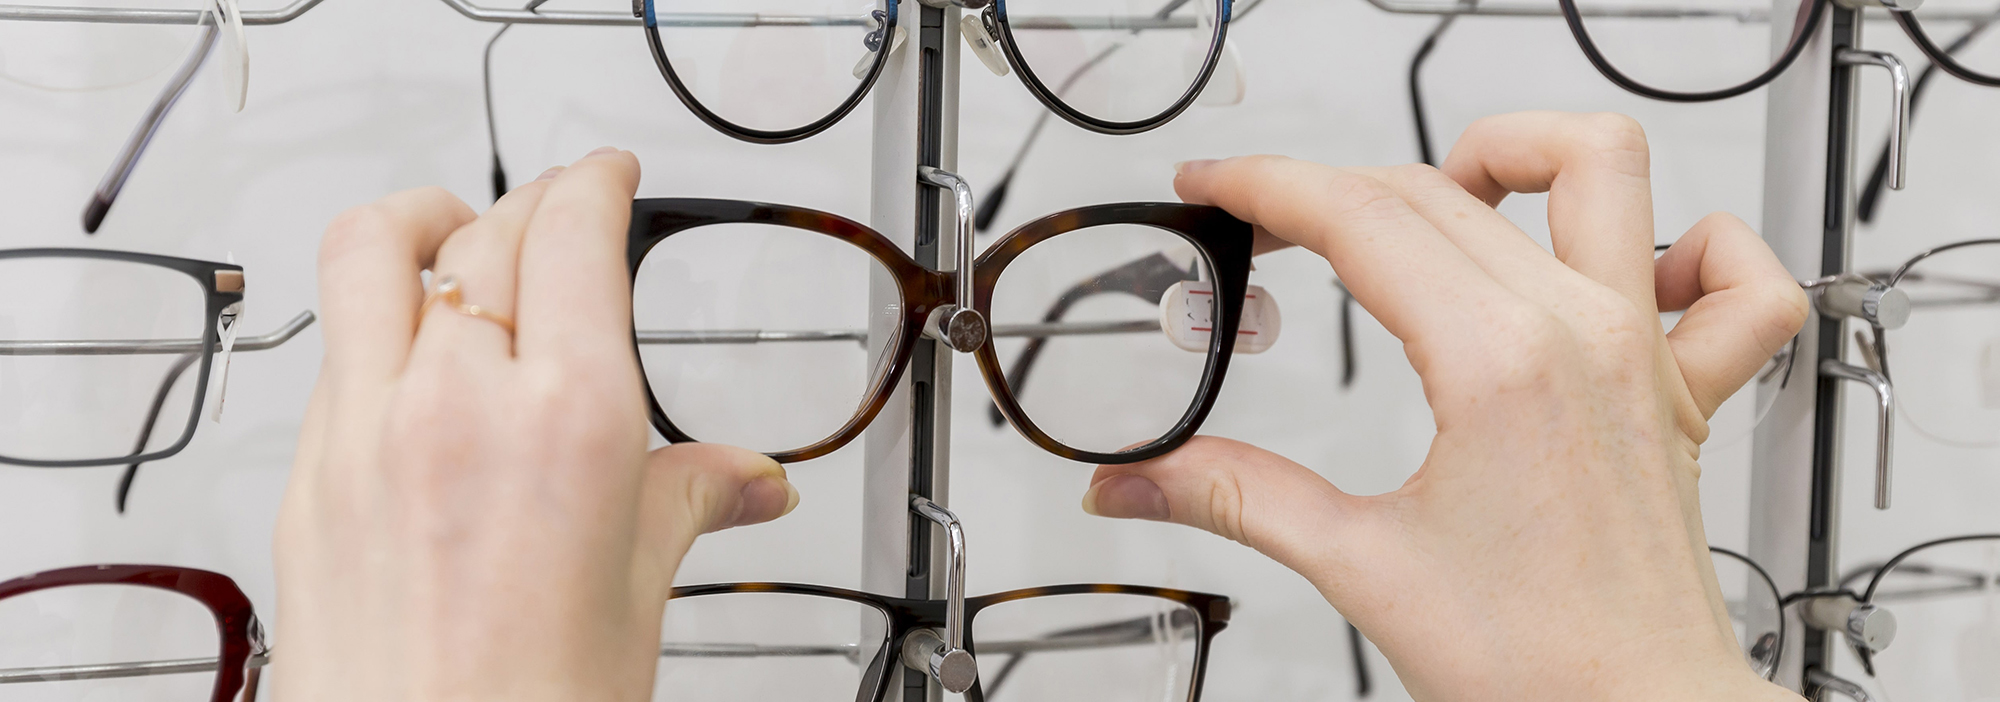 Choosing Frames: Matching Different Face Shapes Guide